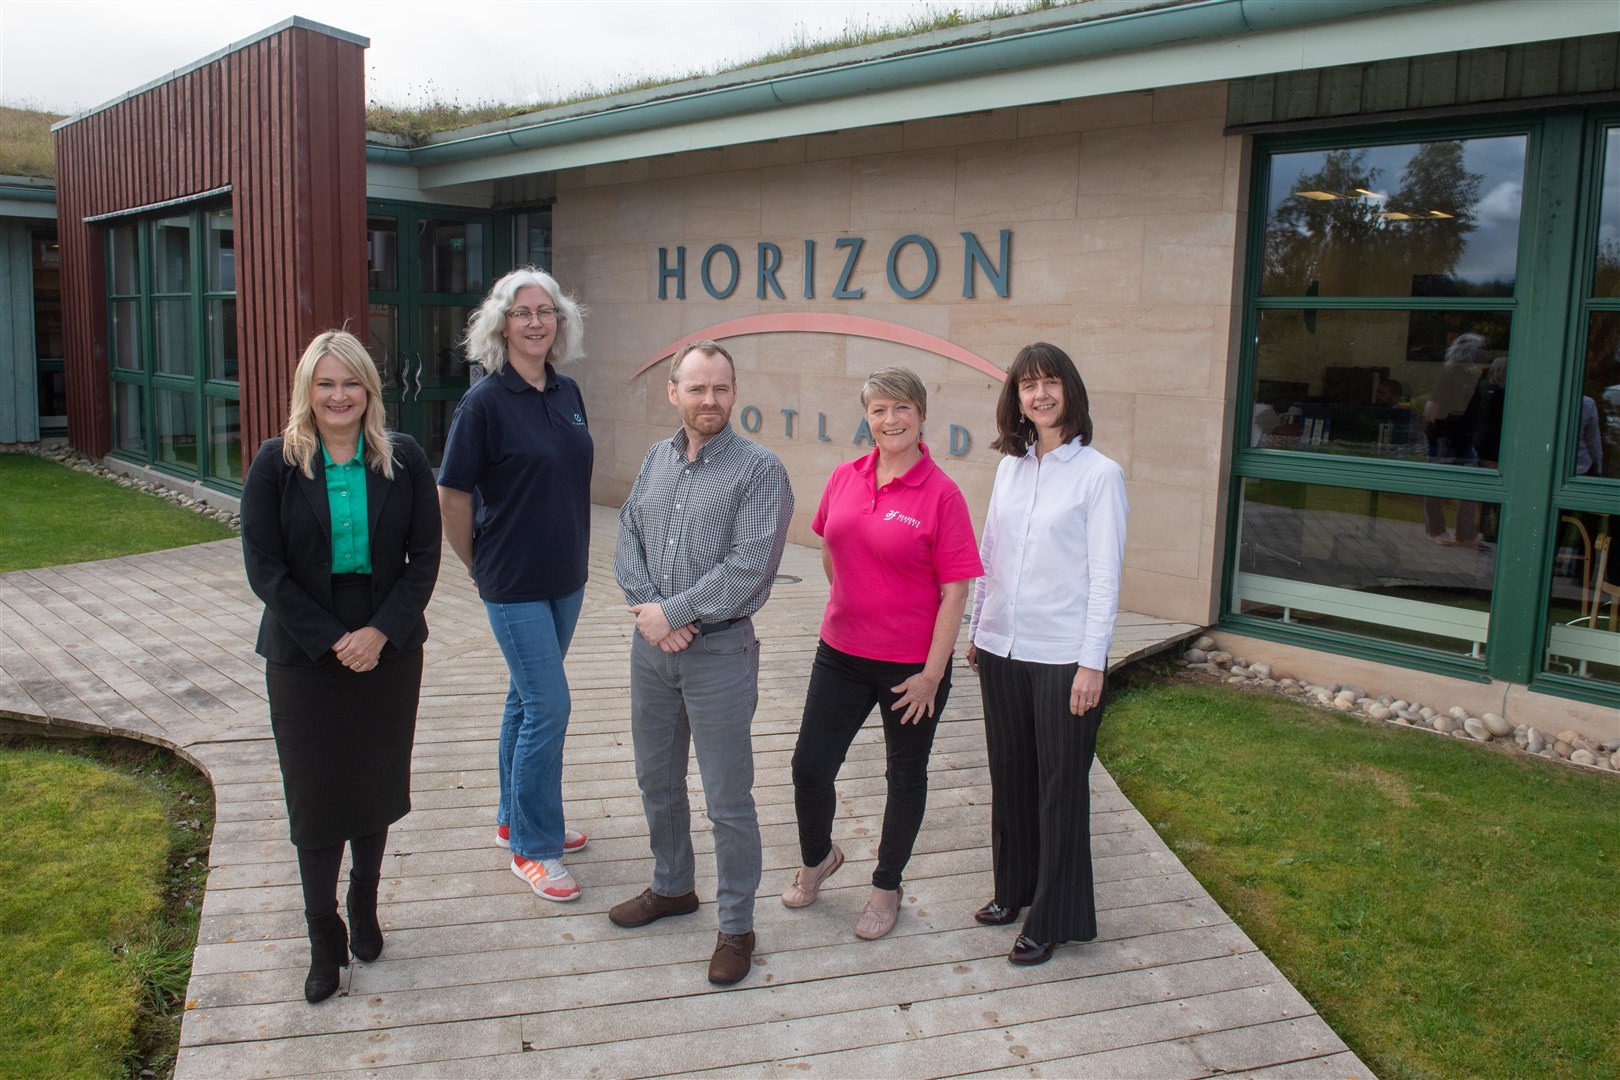 (From left) is Carol Davidson, HIE regional development manager, Lee Midlane of IT Central, Richard Cormack Corrigan, Elevator Moray Accelerator Manager, Gloria Craik of Heavenly Favour and Donna Chisholm, HIE Moray area manager at Horizon in Forres. Picture by Abermedia / Michal Wachucik